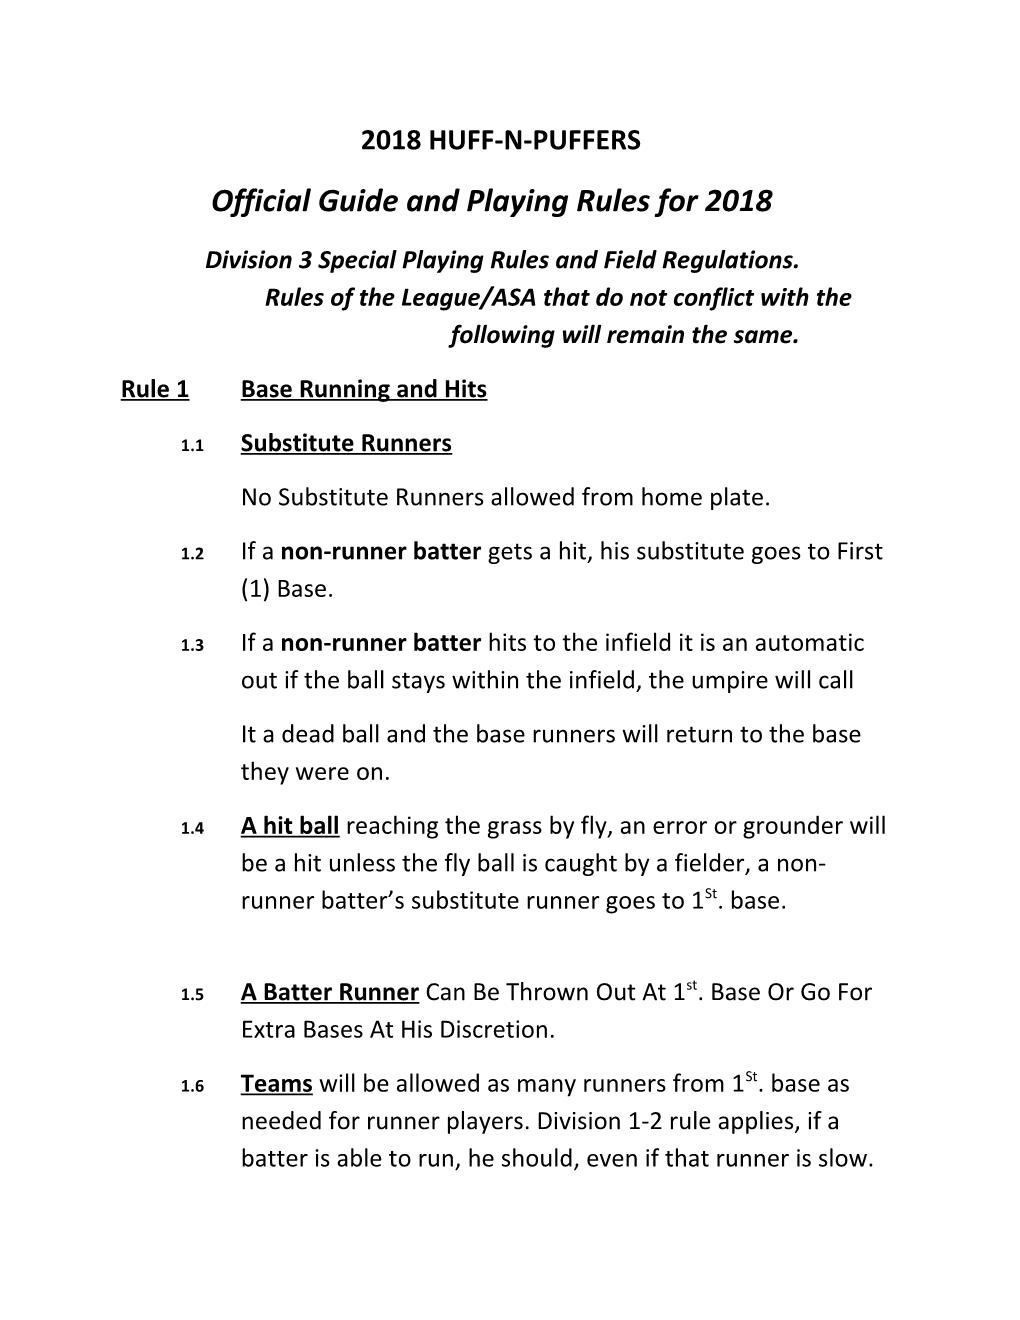 Official Guide and Playing Rules for 2018